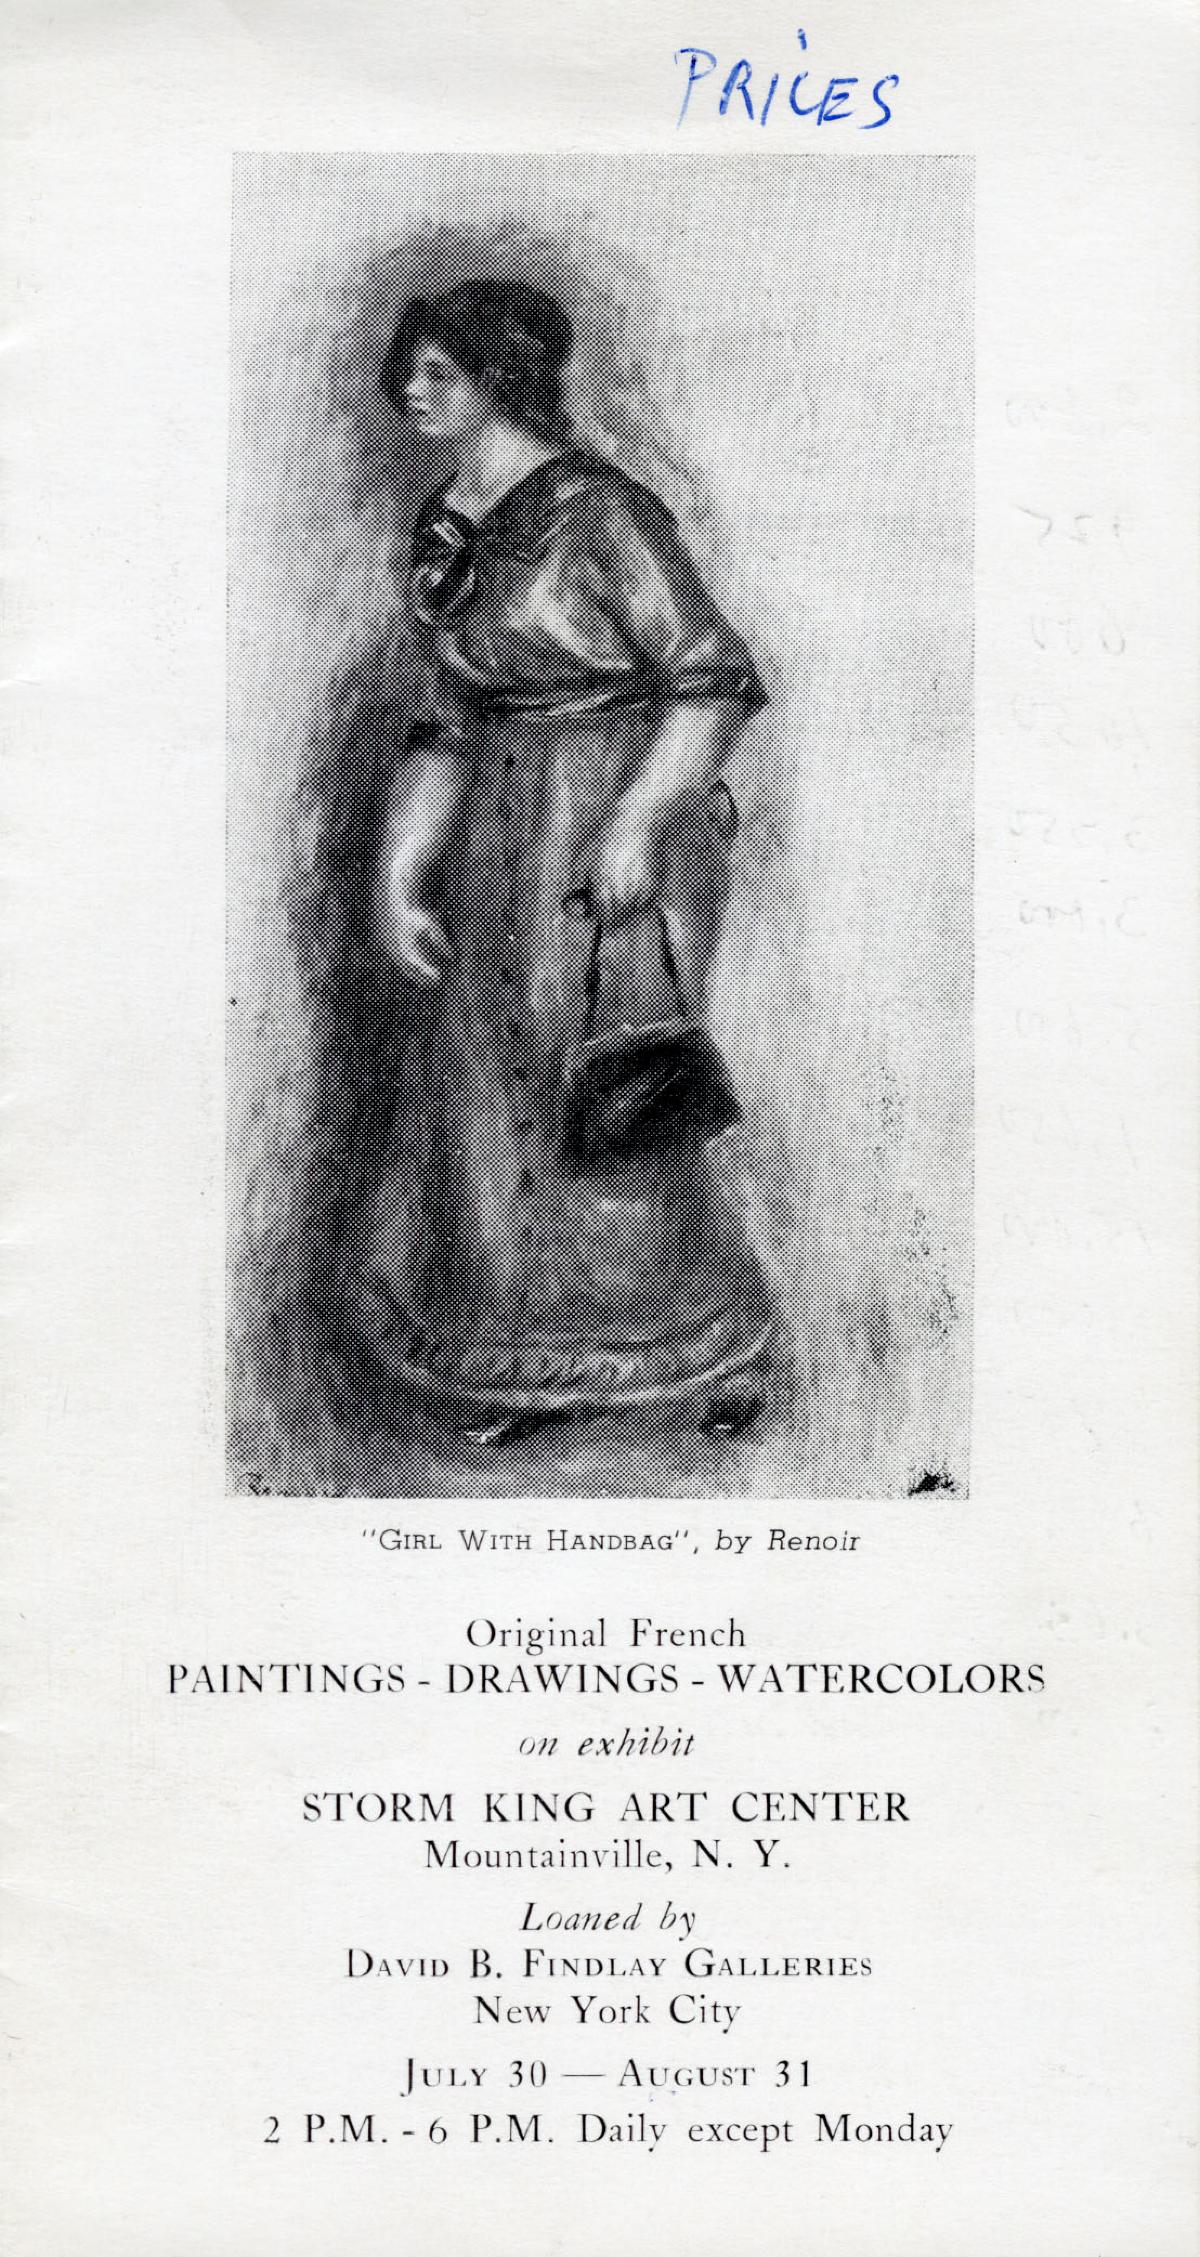 Original French Paintings, Drawings, Watercolors, July 30-August 31, 1961, catalogue cover 